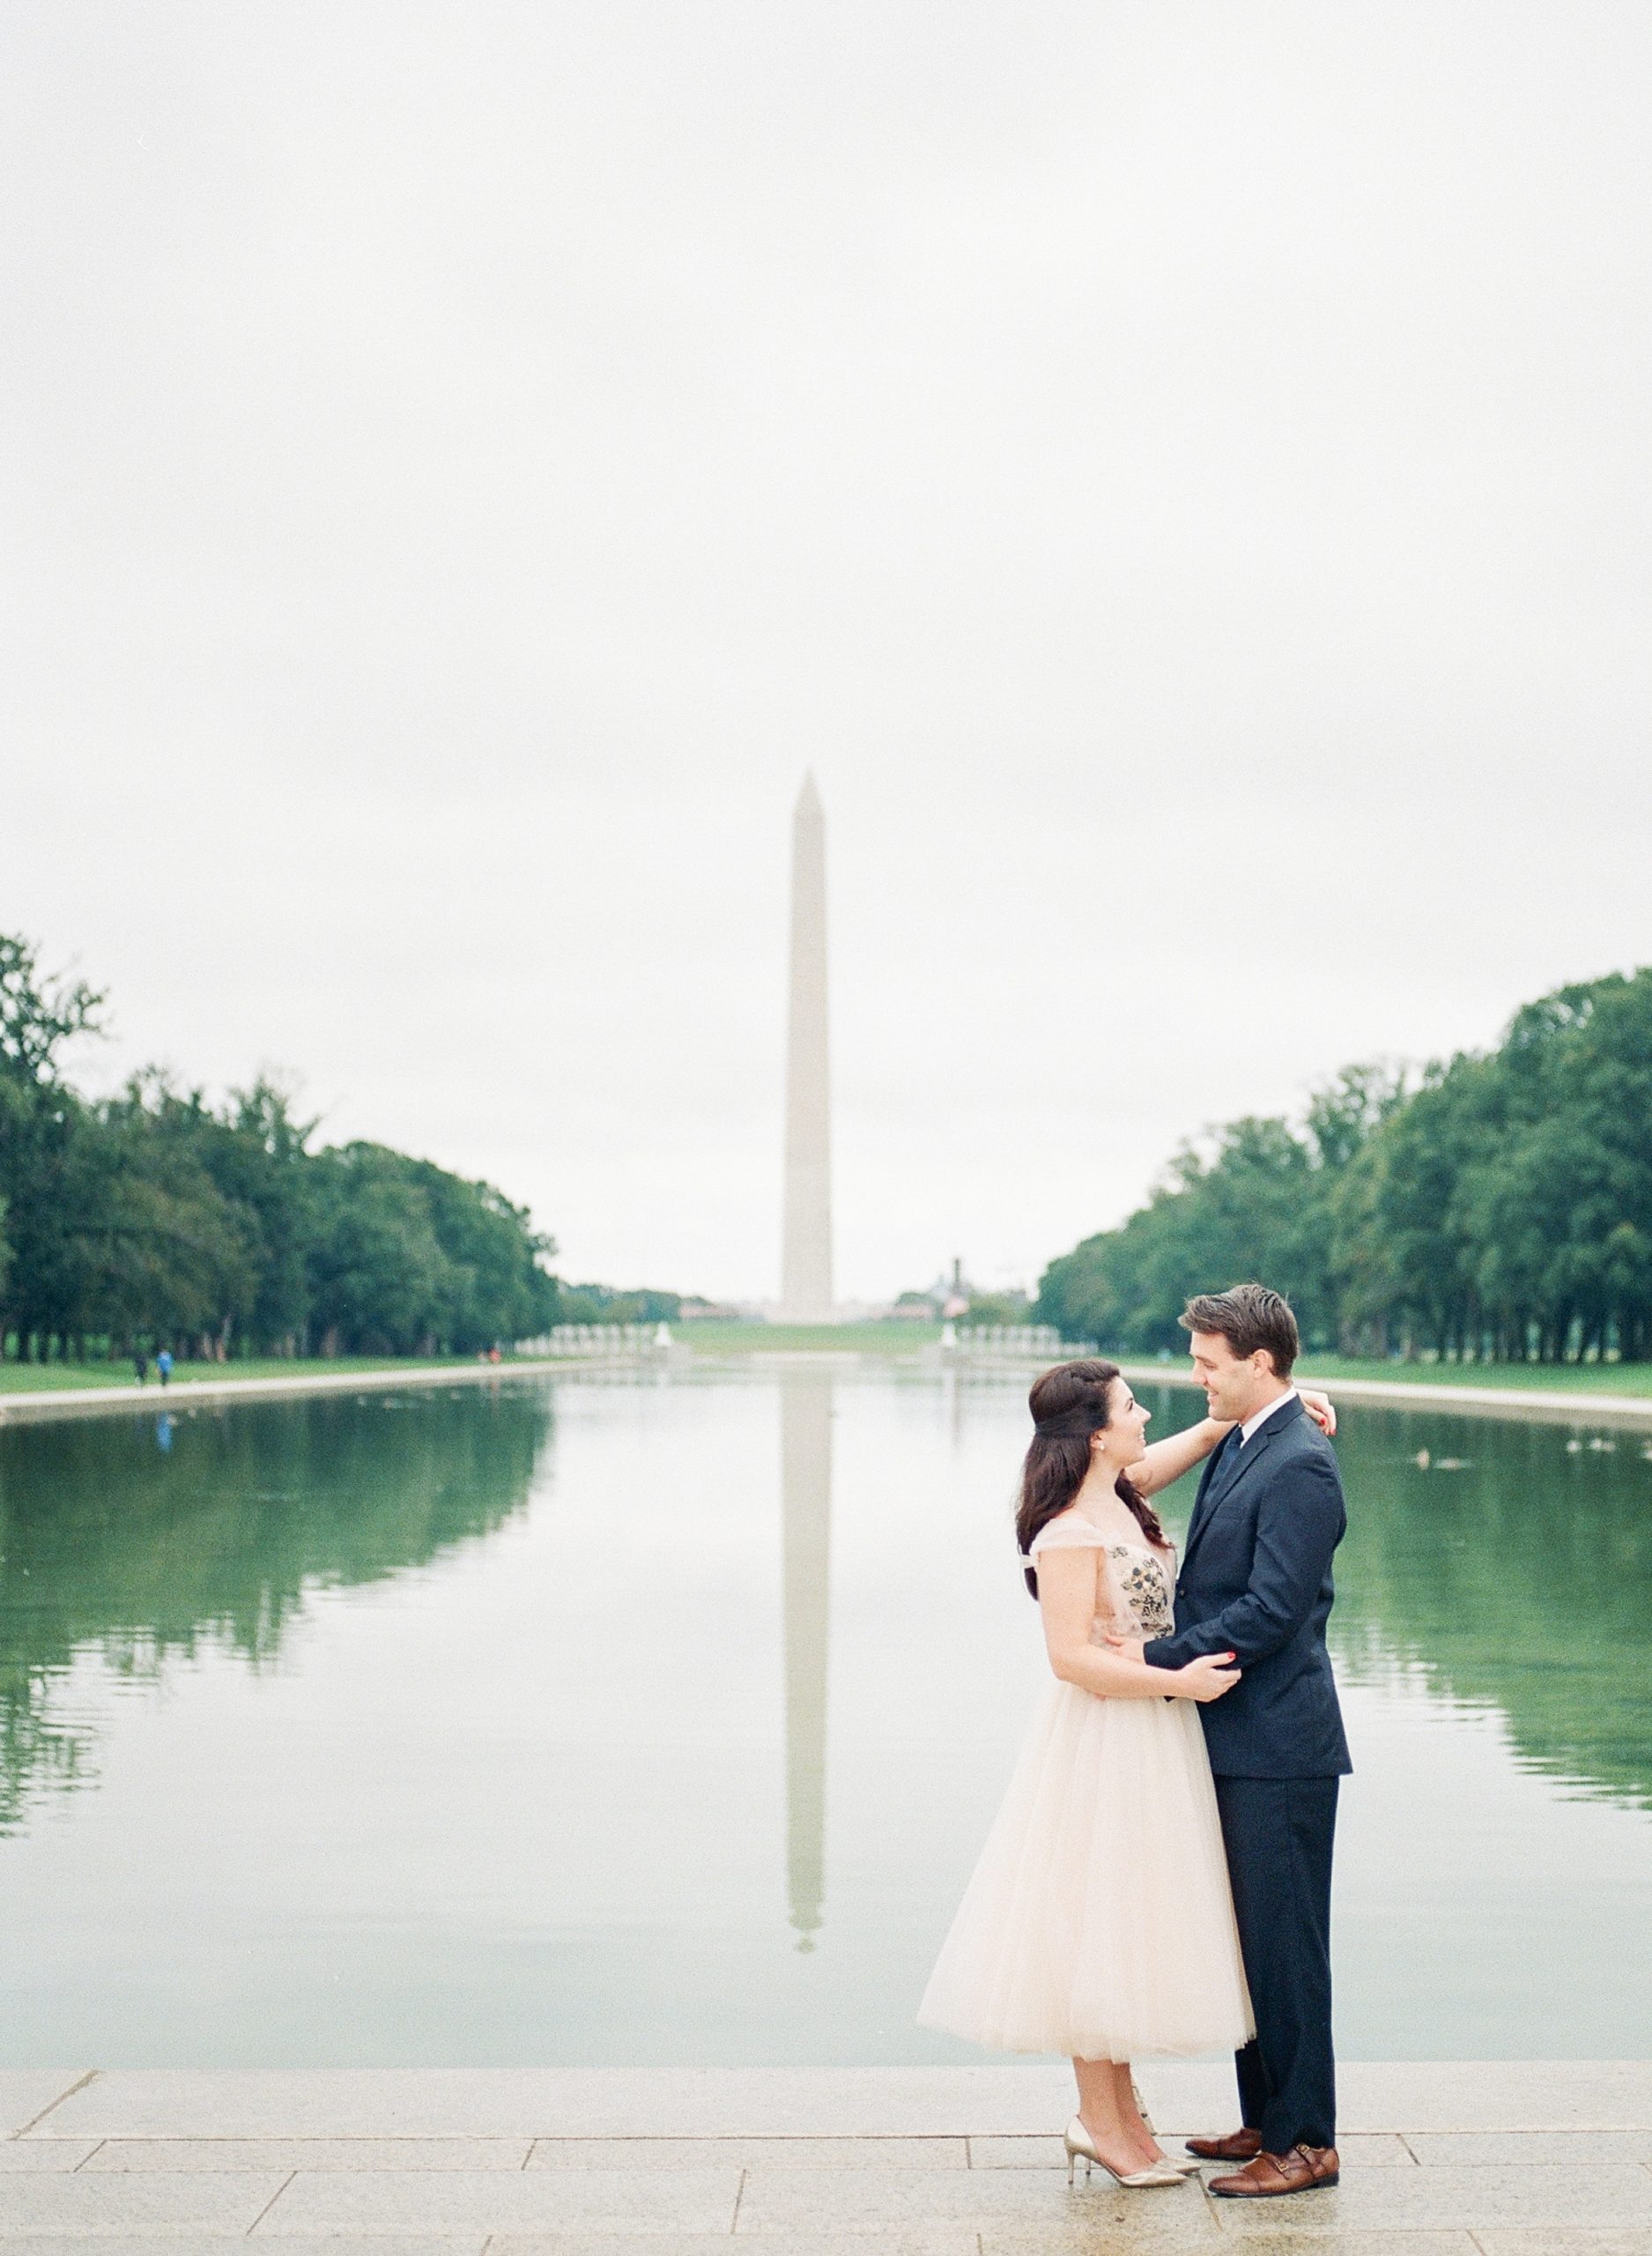 A chic sunrise engagement session at the Lincoln Memorial in Washington DC. Photographed by fine art film photographer, Alicia Lacey.